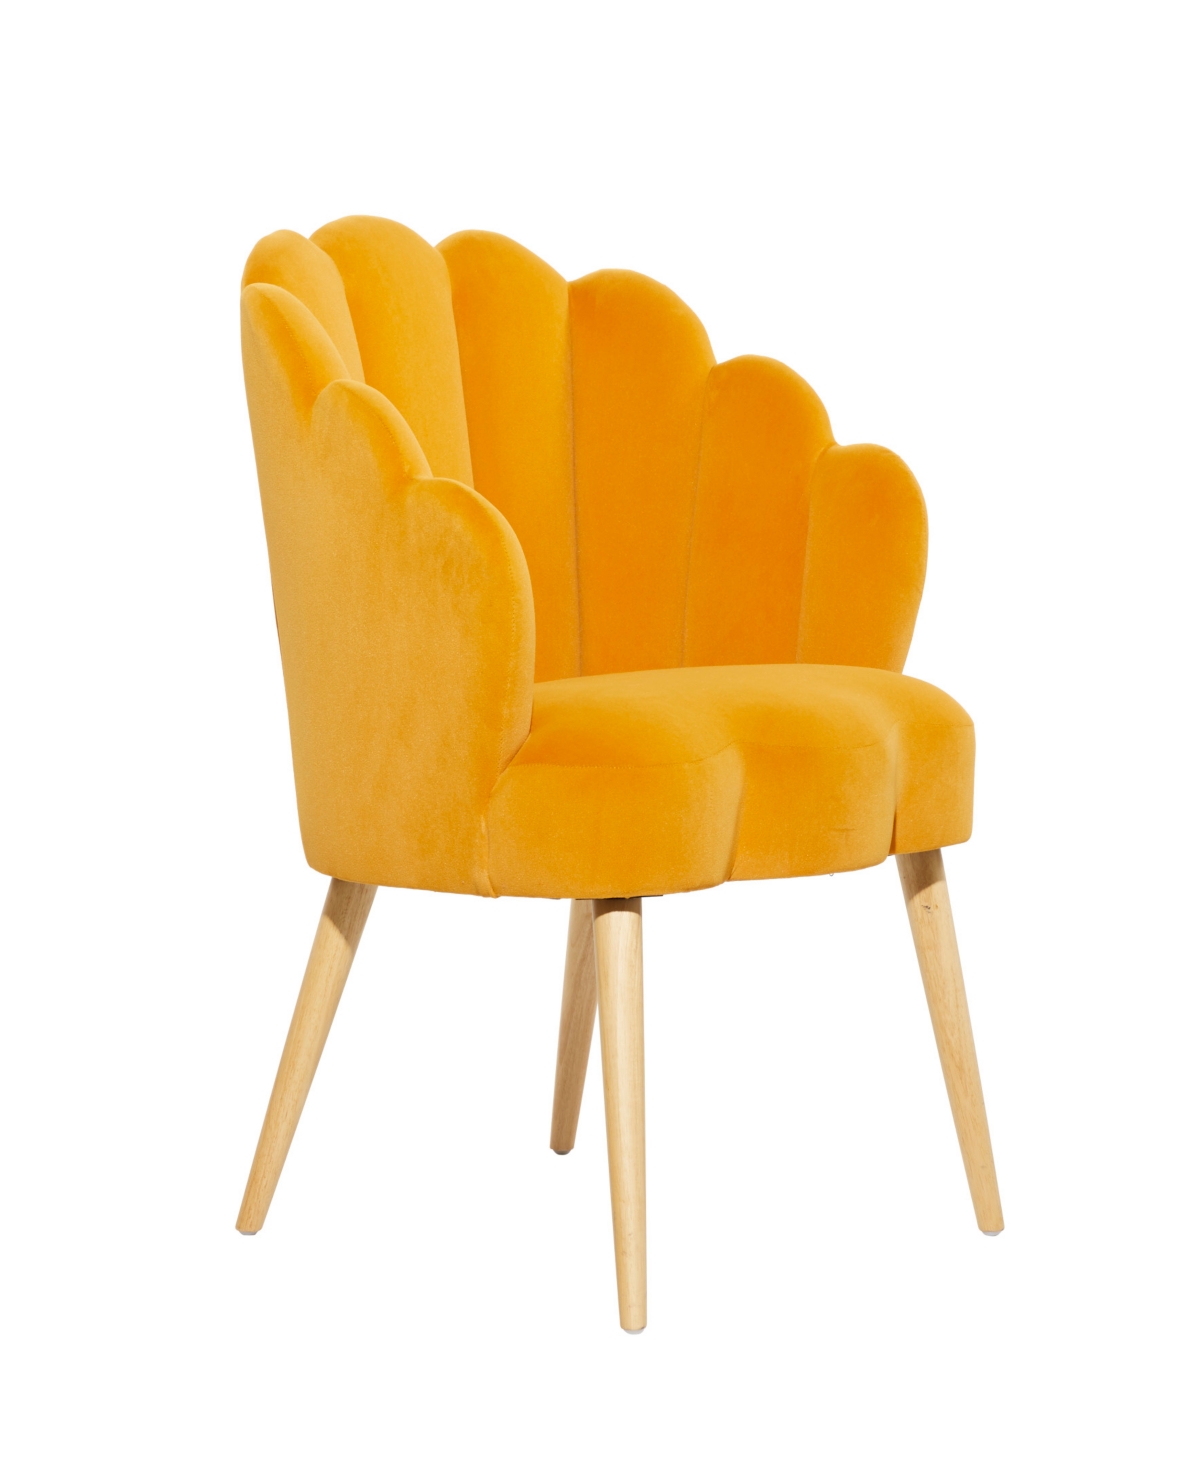 Rosemary Lane Wood Sea Shell Accent Chair, 27" X 22" X 31" In Yellow